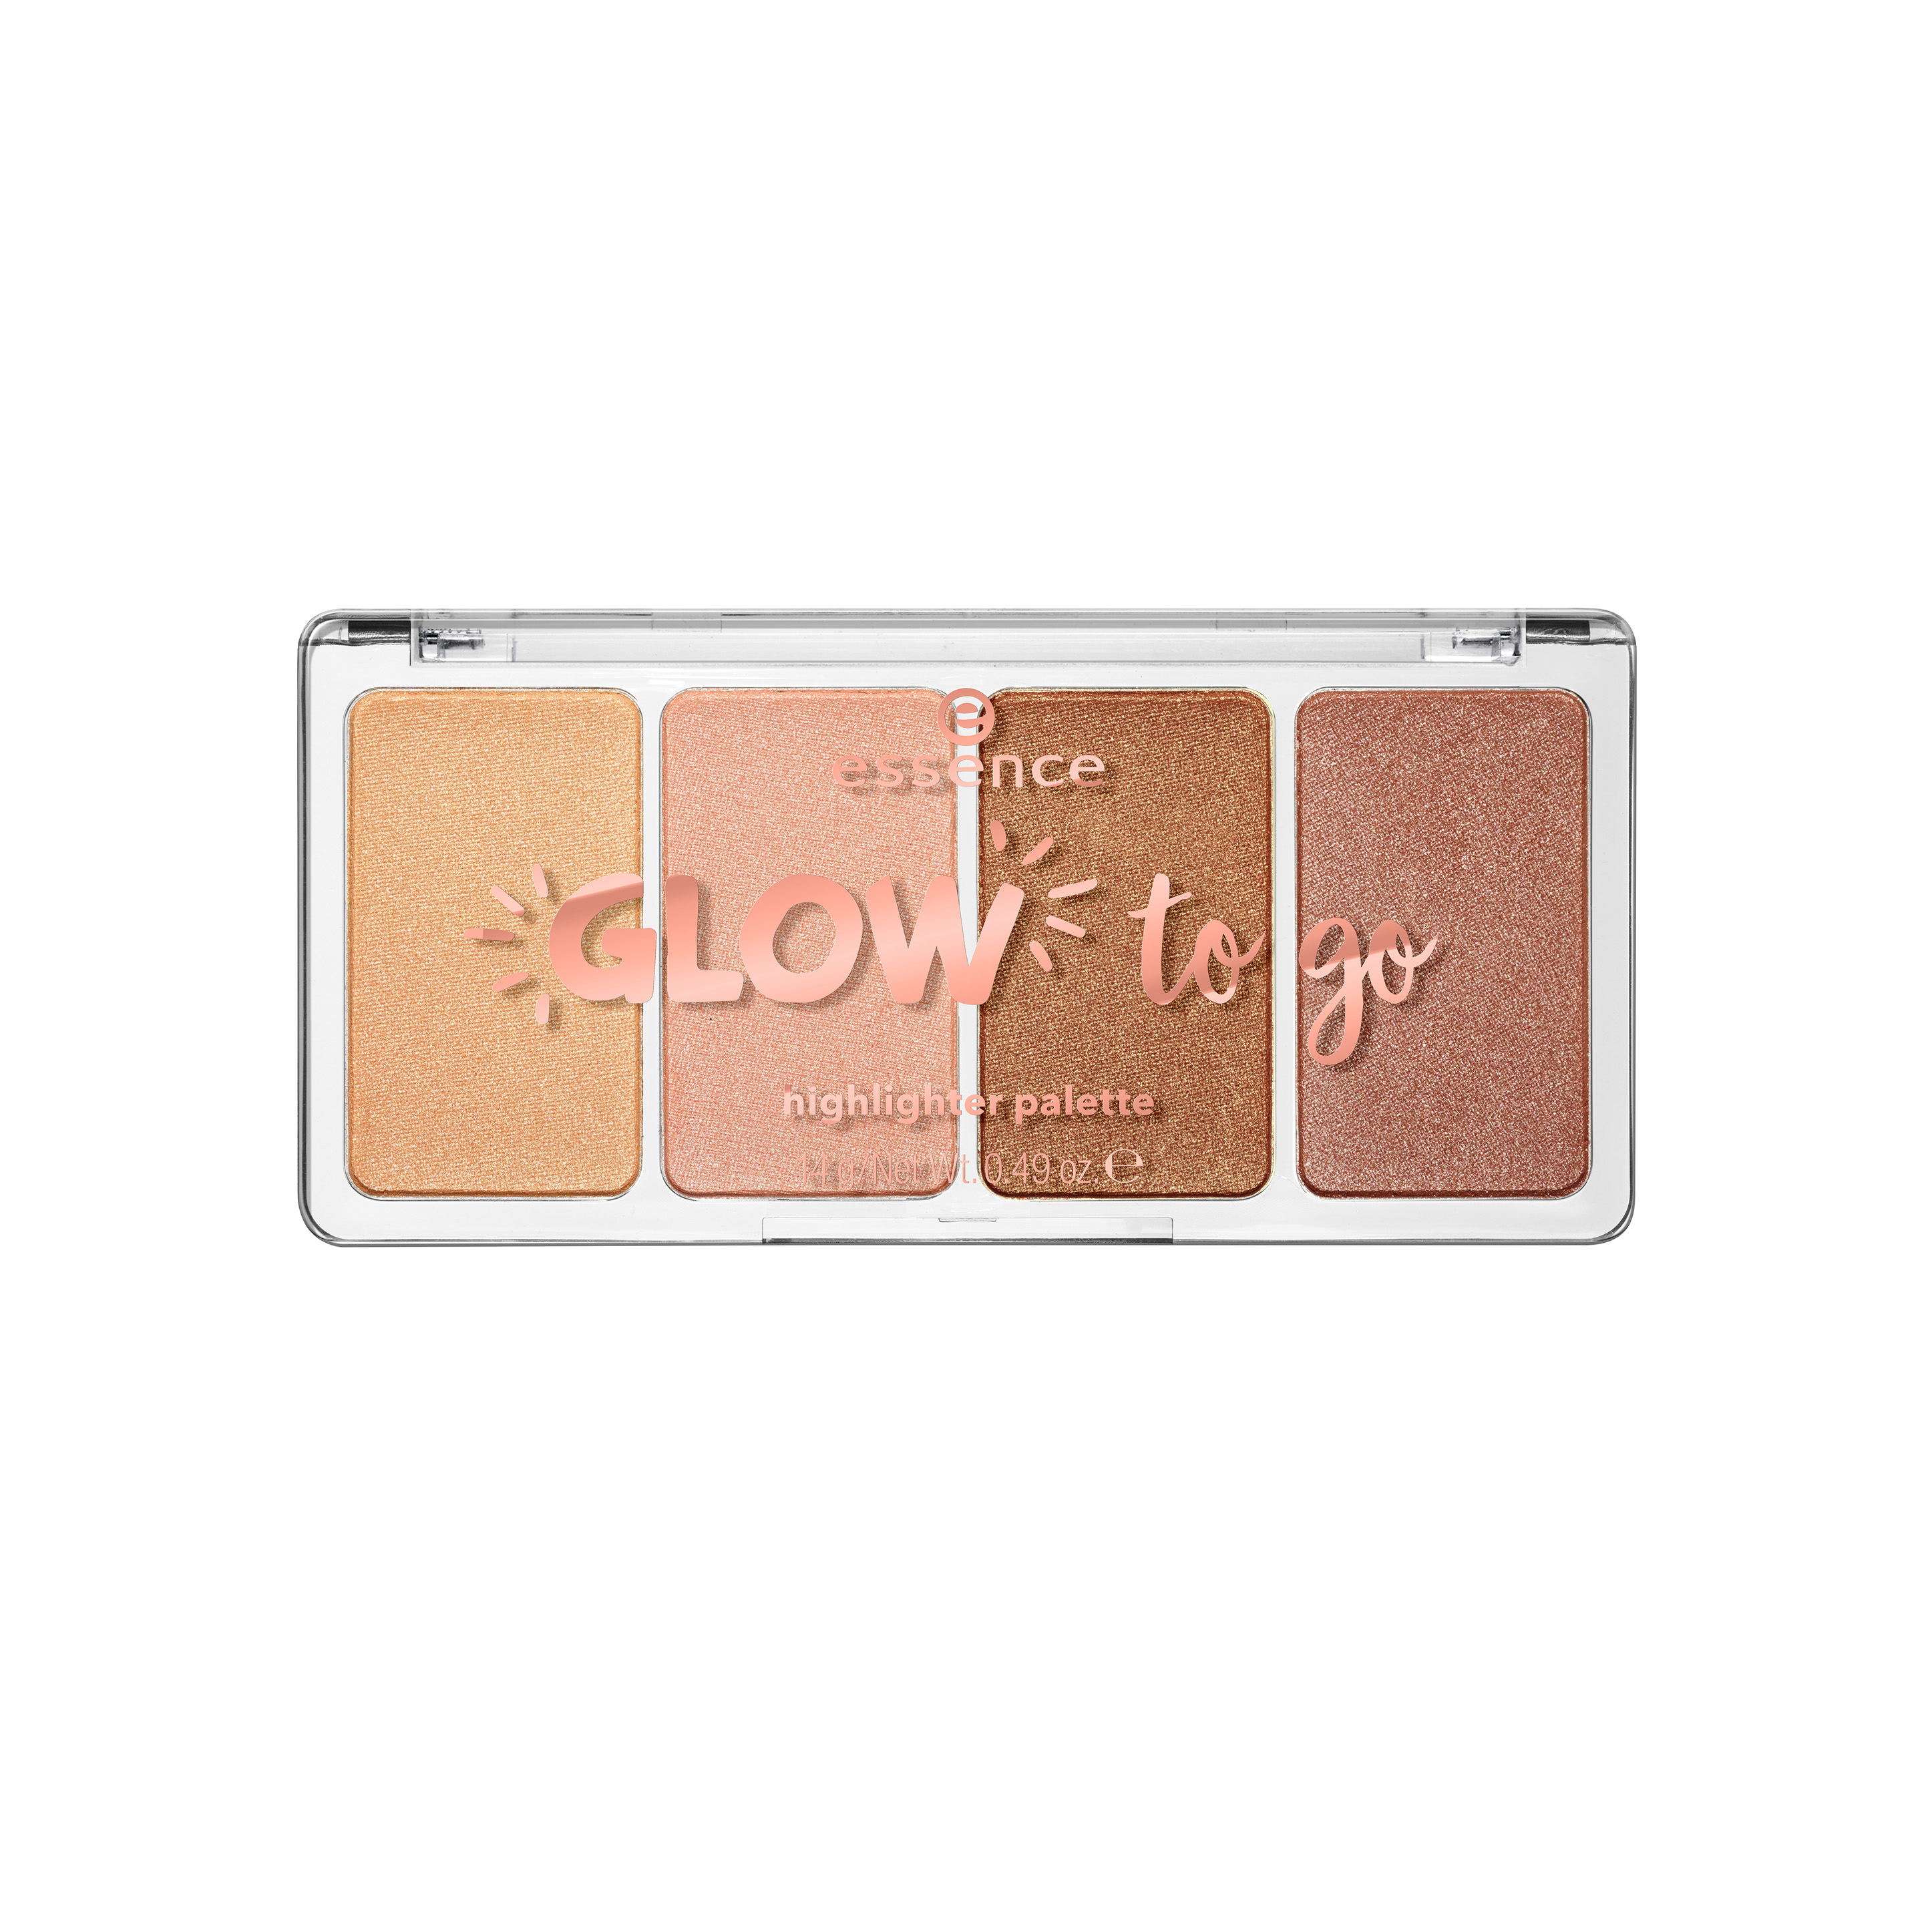 ess. glow to go highlighter palette 10